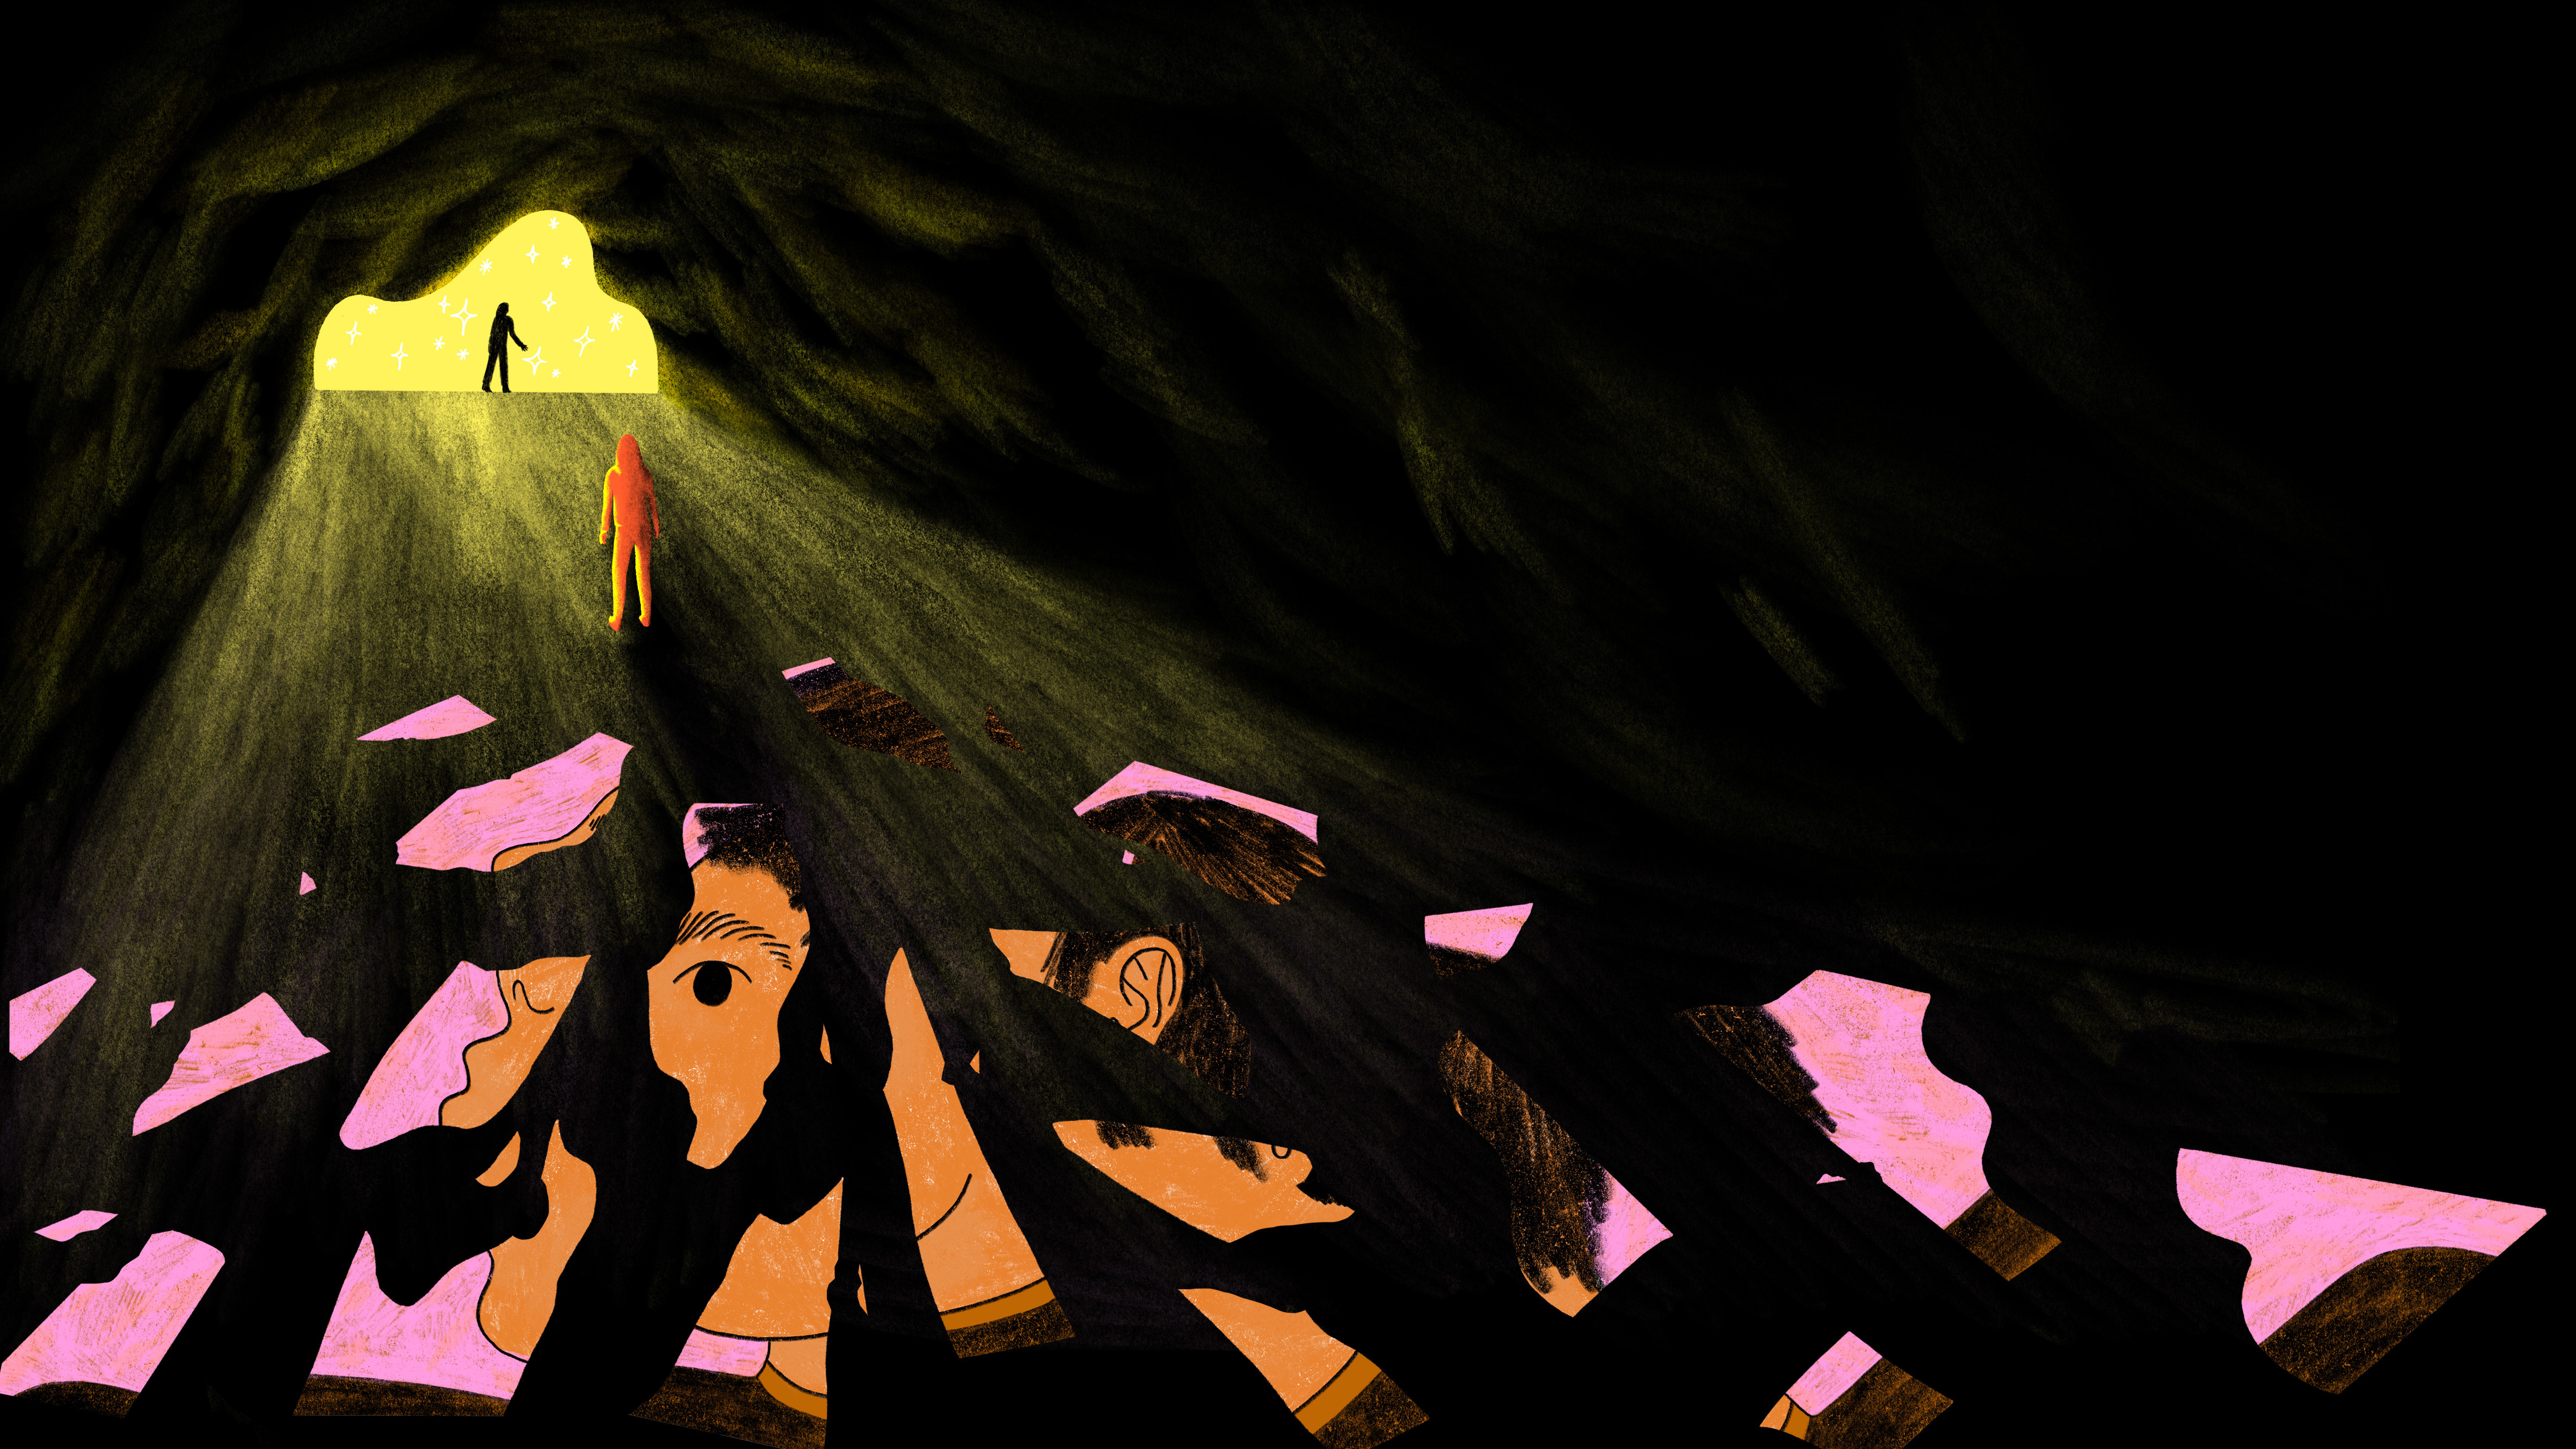 A figure walks out of a dark cave into the light. Shards of a broken picture remain behind them in the cave.